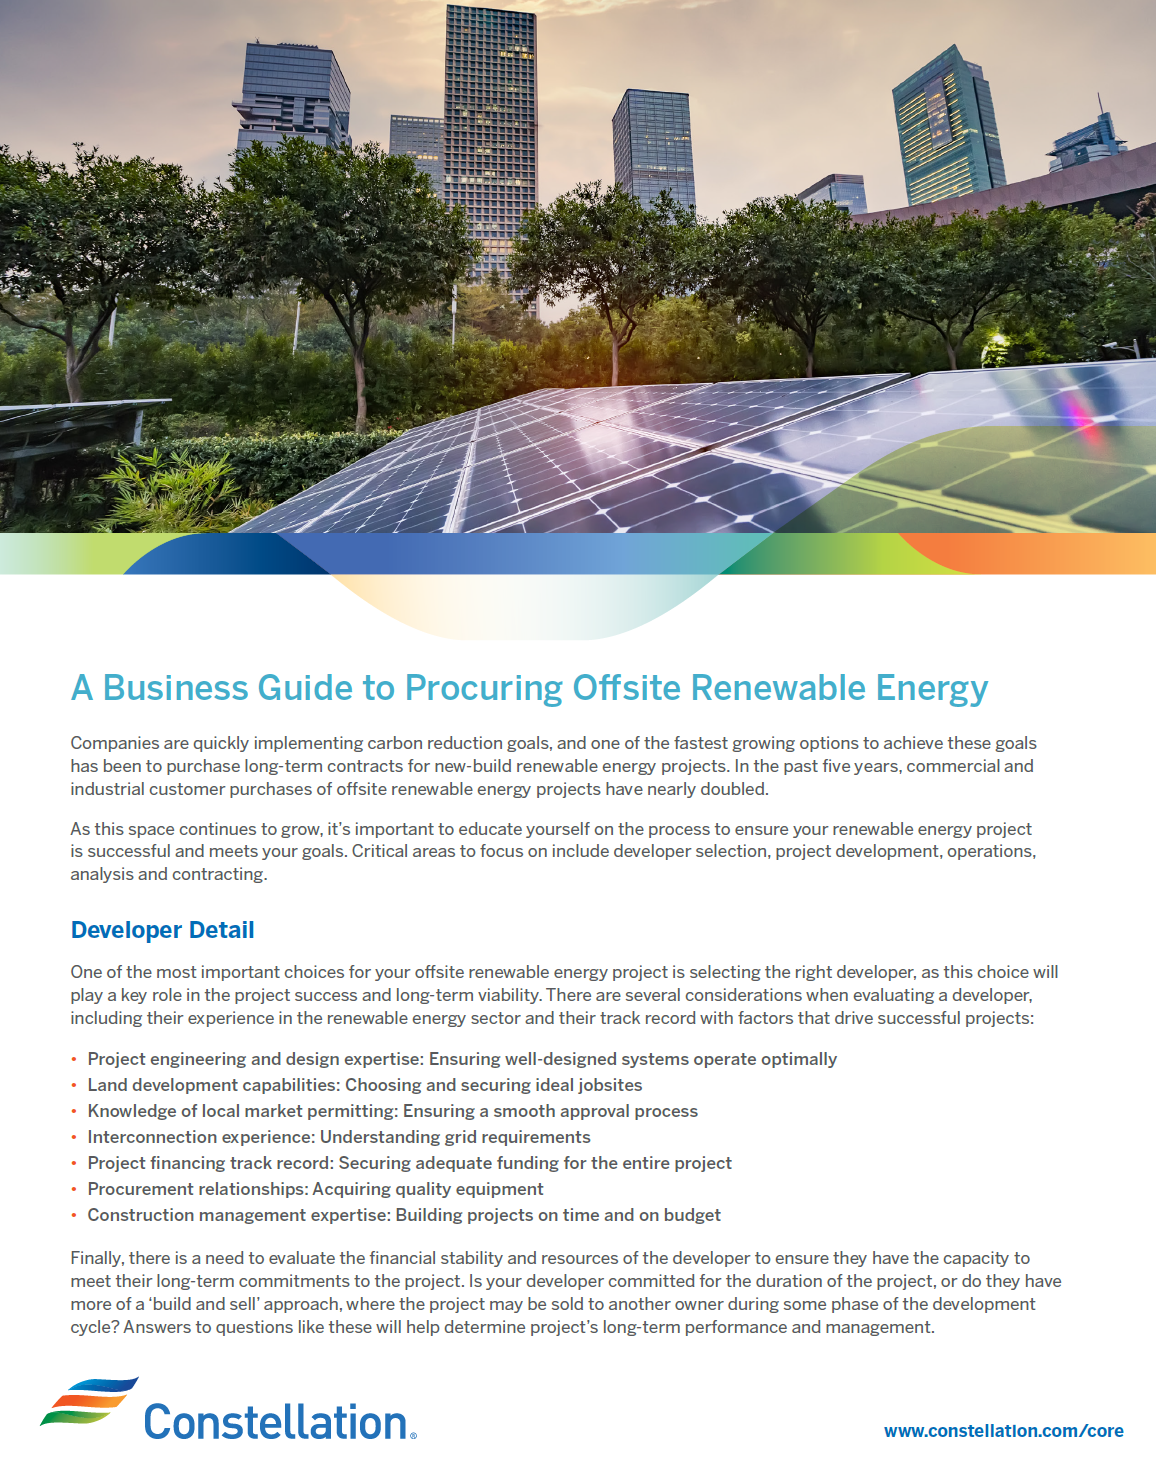 A Business Guide to Procuring Offsite Renewable Energy